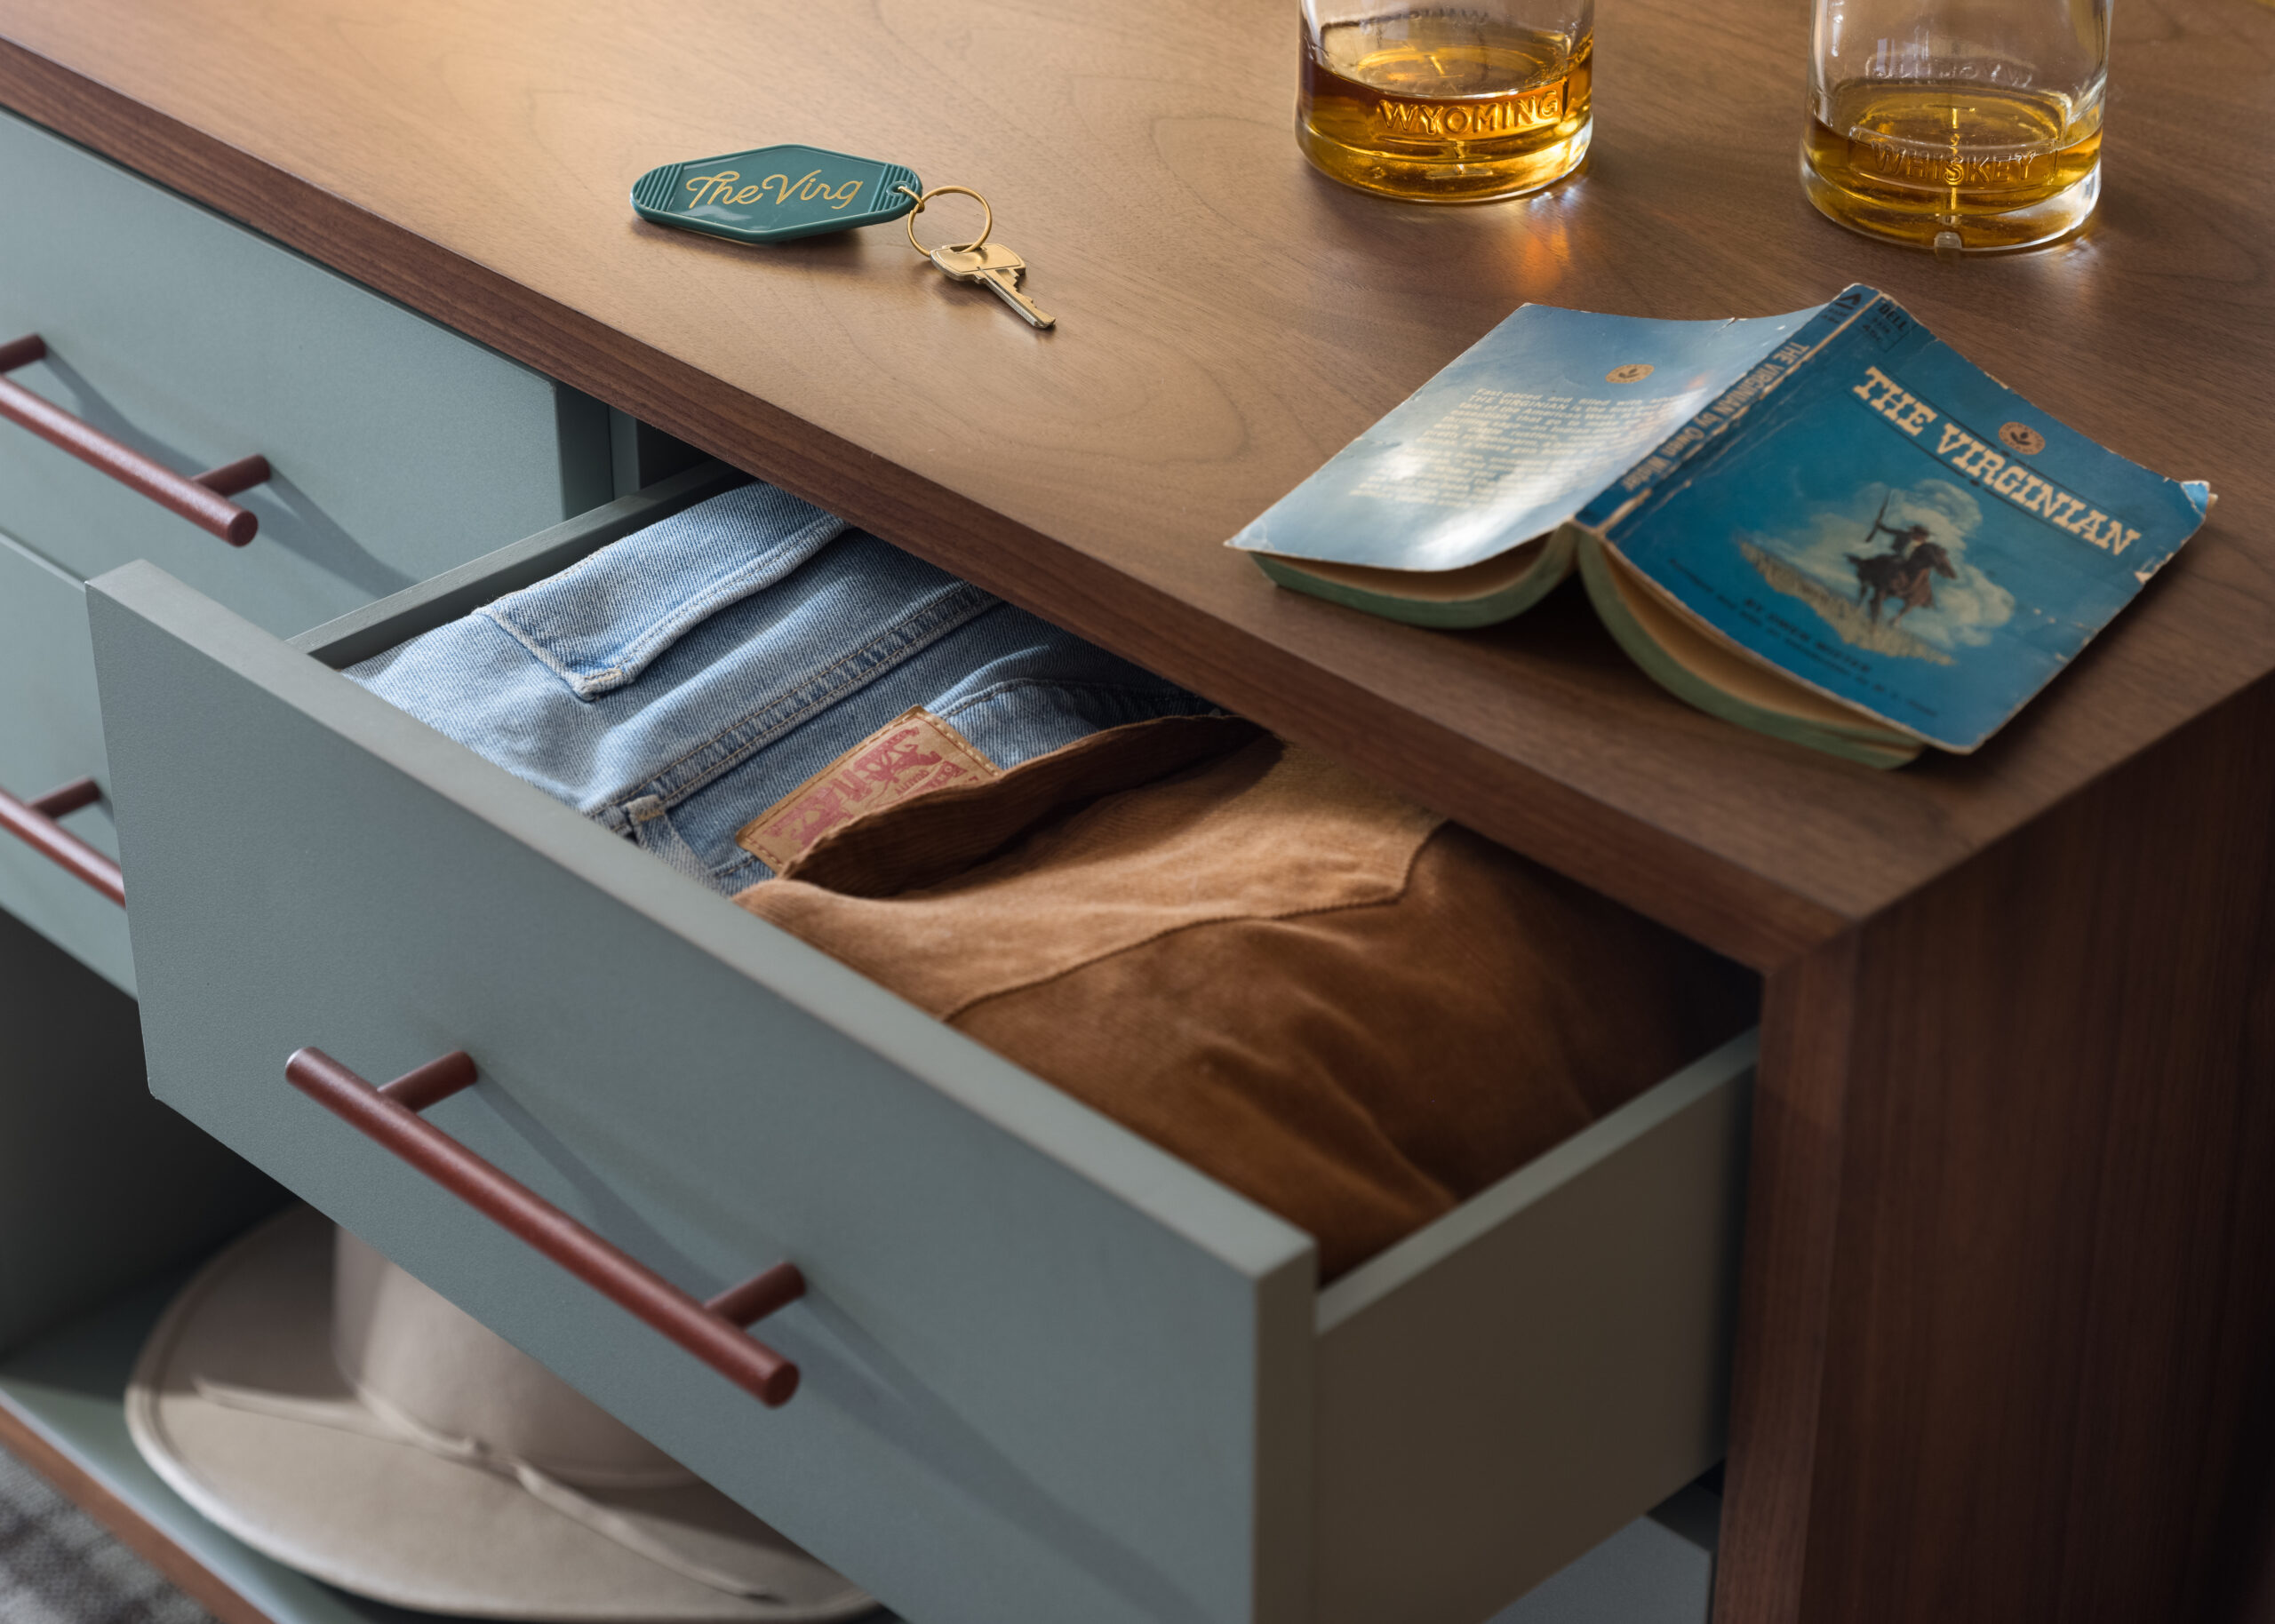 Drawer neatly stores clothes, with a table featuring a key, notebook, and alcohol glasses.